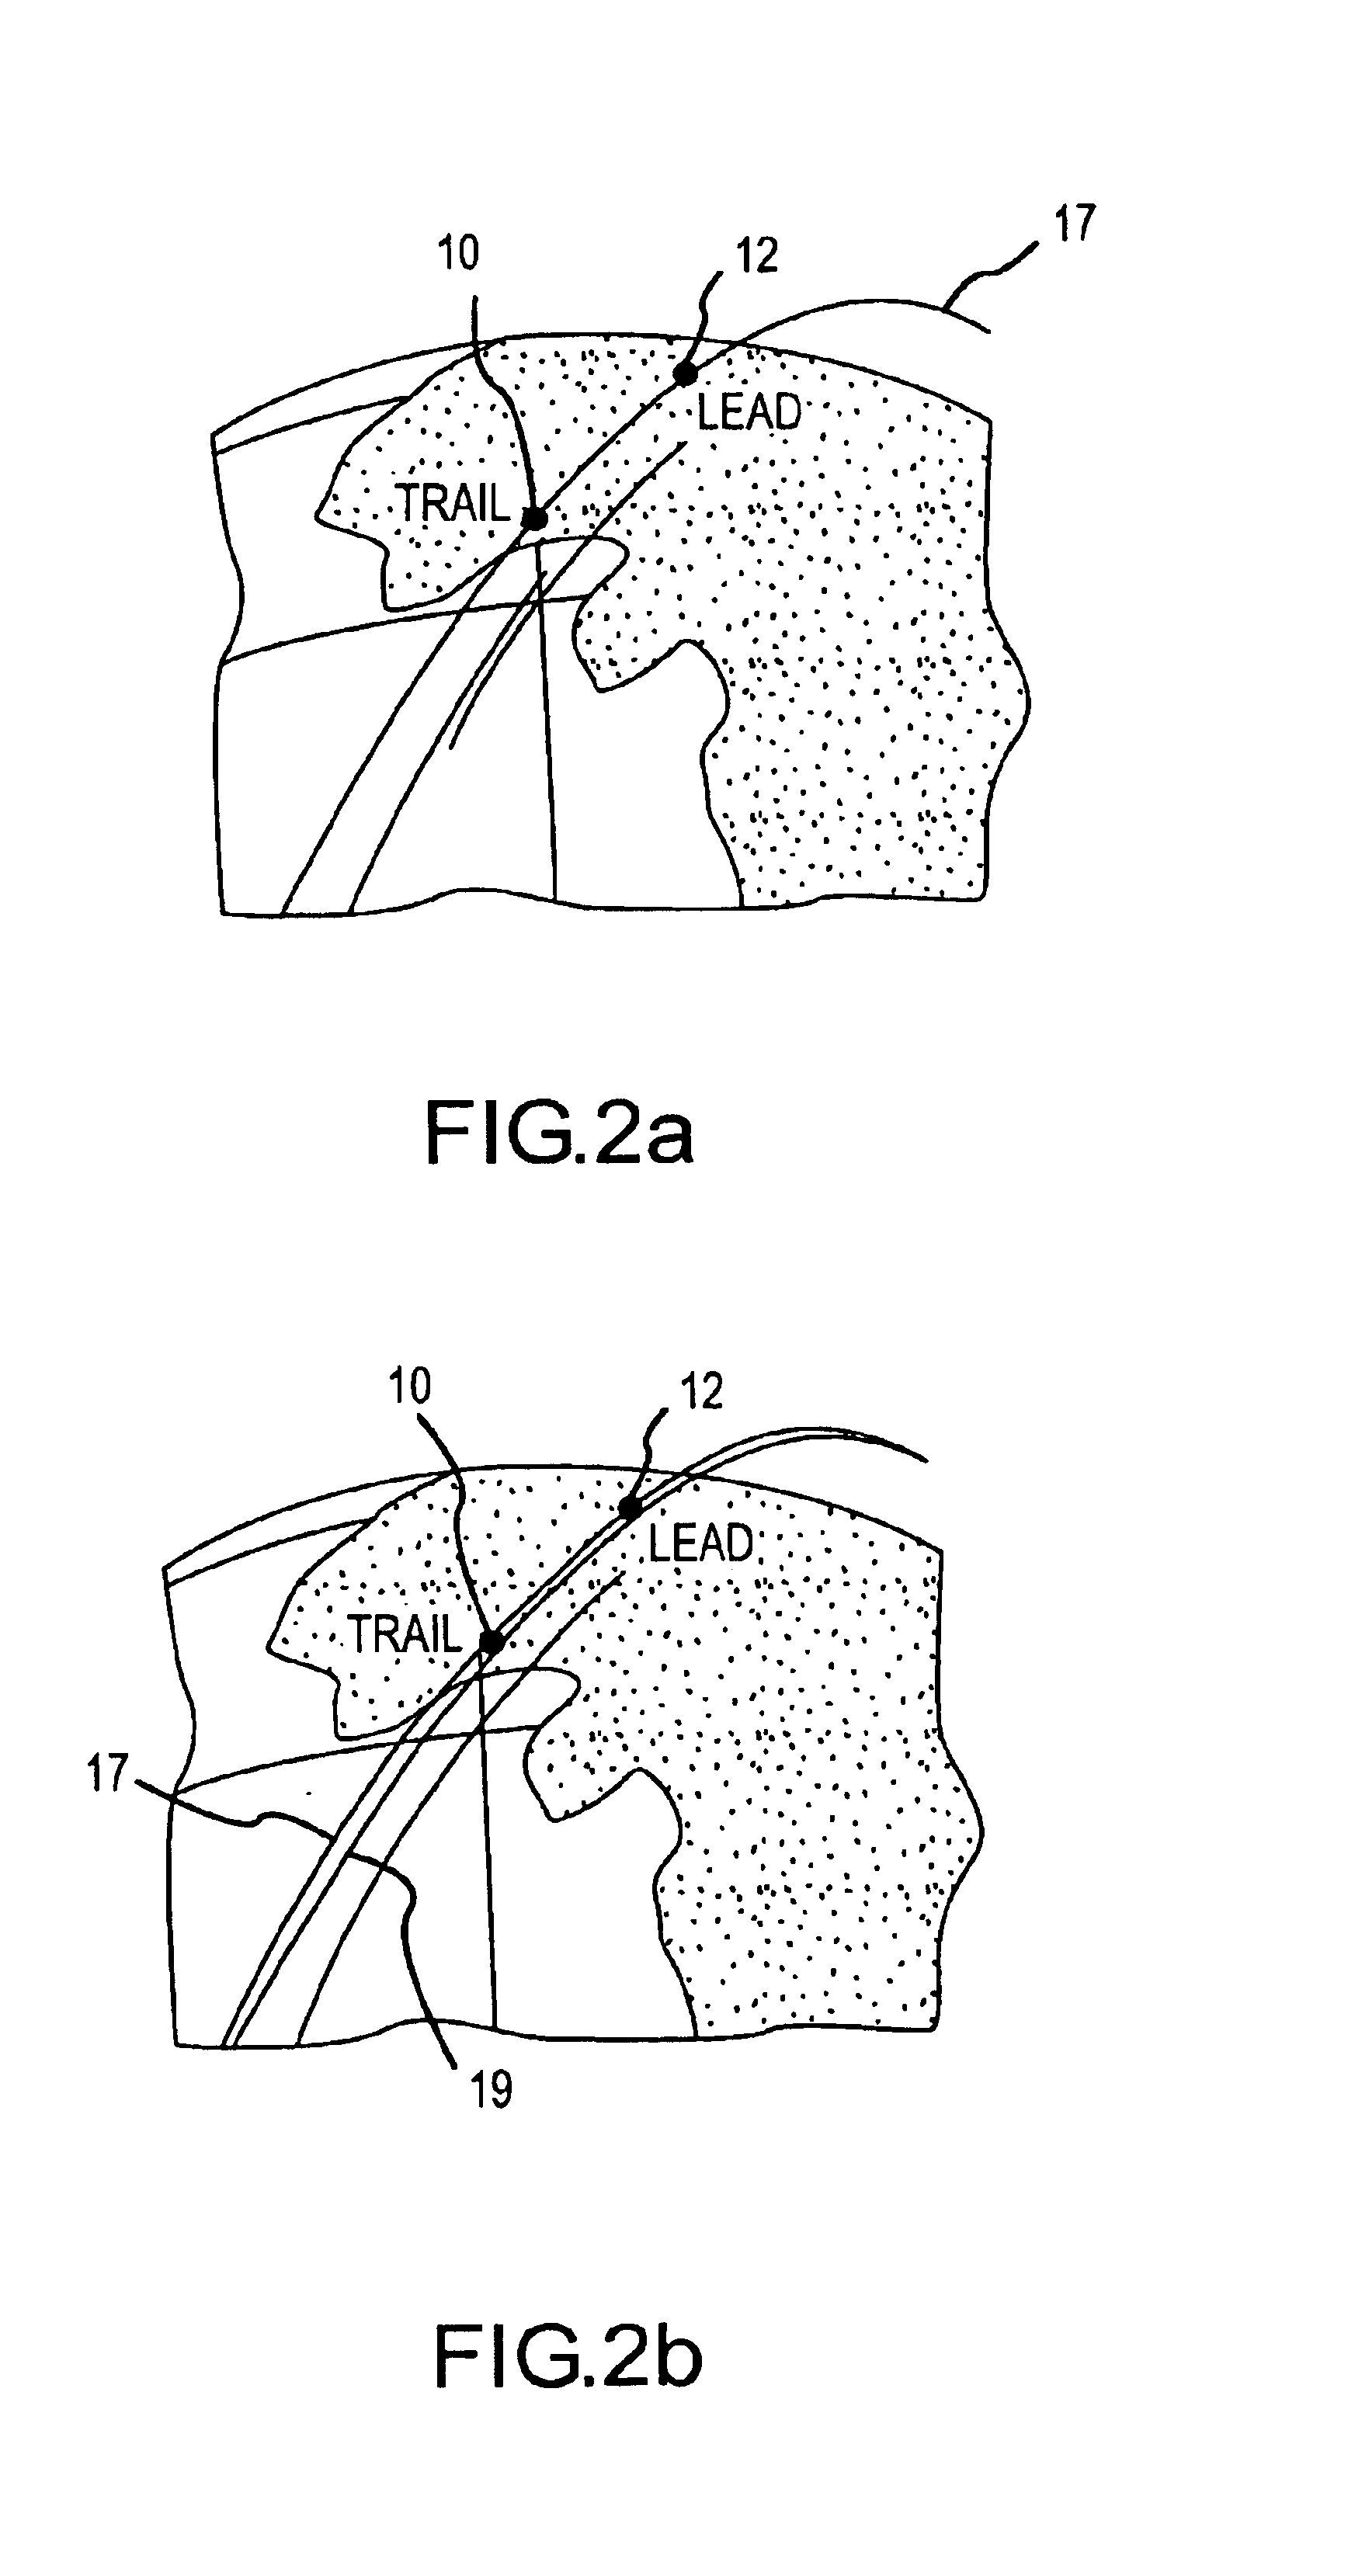 Method and apparatus for collection and processing of interferometric synthetic aperture radar data